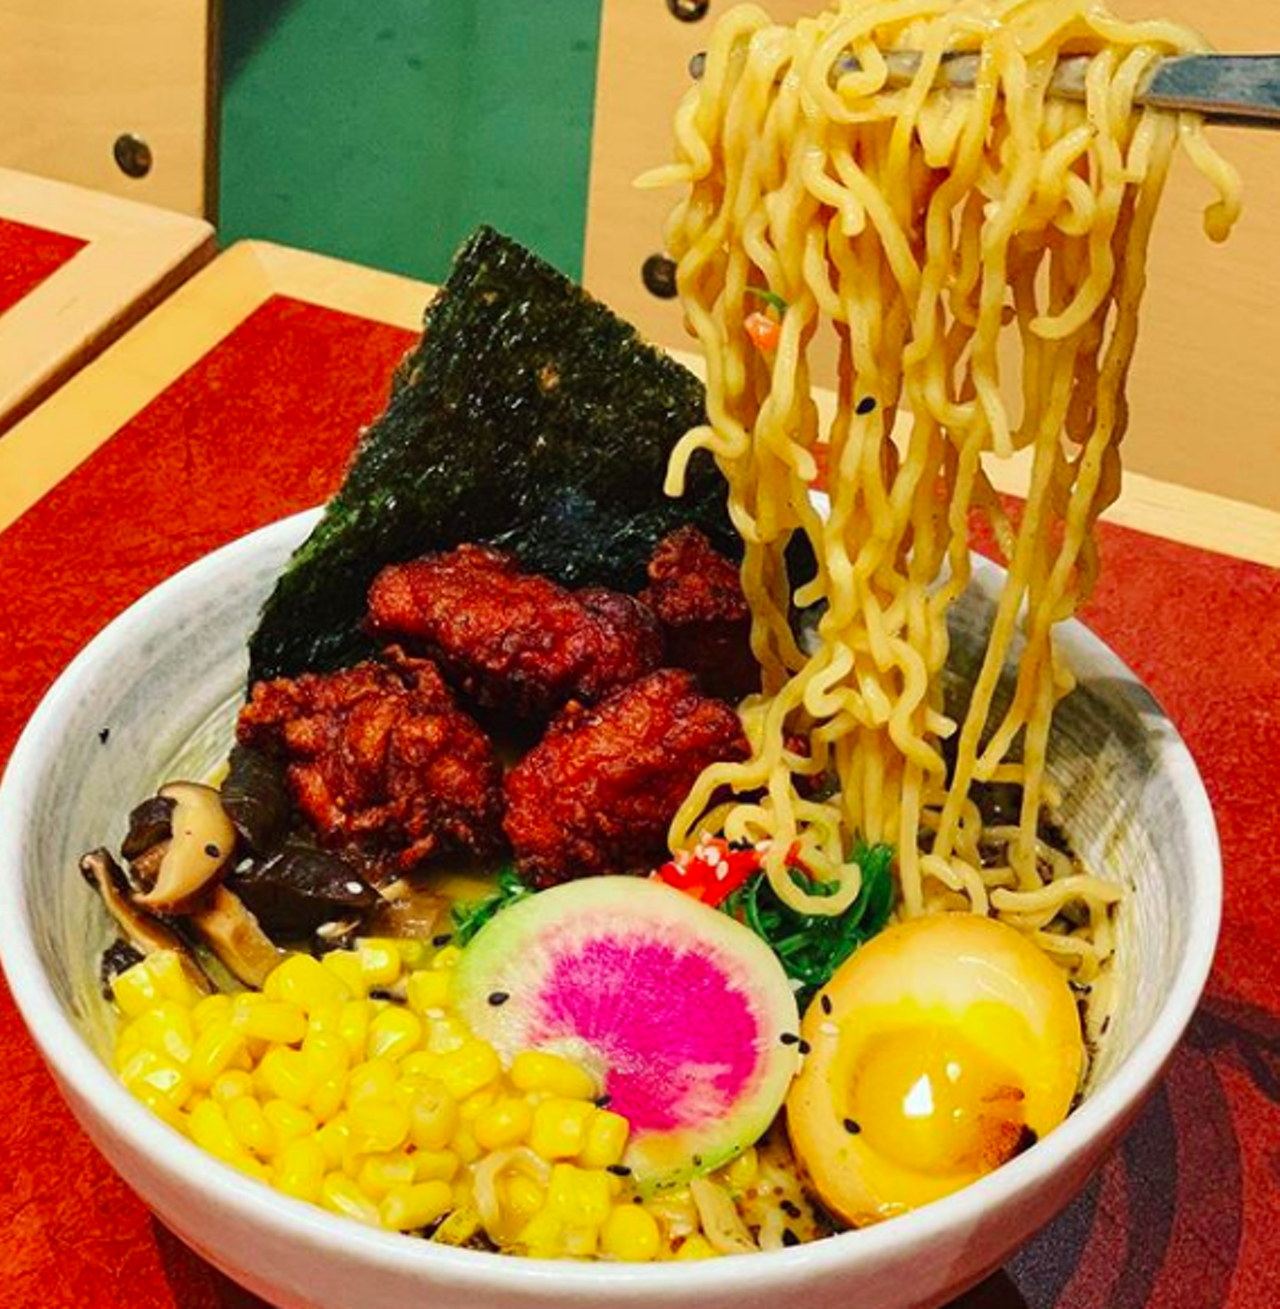 Noodle Tree
7114 UTSA Boulevard, facebook.com/noodletreetx
Nestled in the UTSA area, this ramen spot has been a hit with students since its January opening. For everyone else, stop by for ramen (duh) and small bites that will make your visit complete to this fresh spot.
Photo via Instagram / noodletreetx